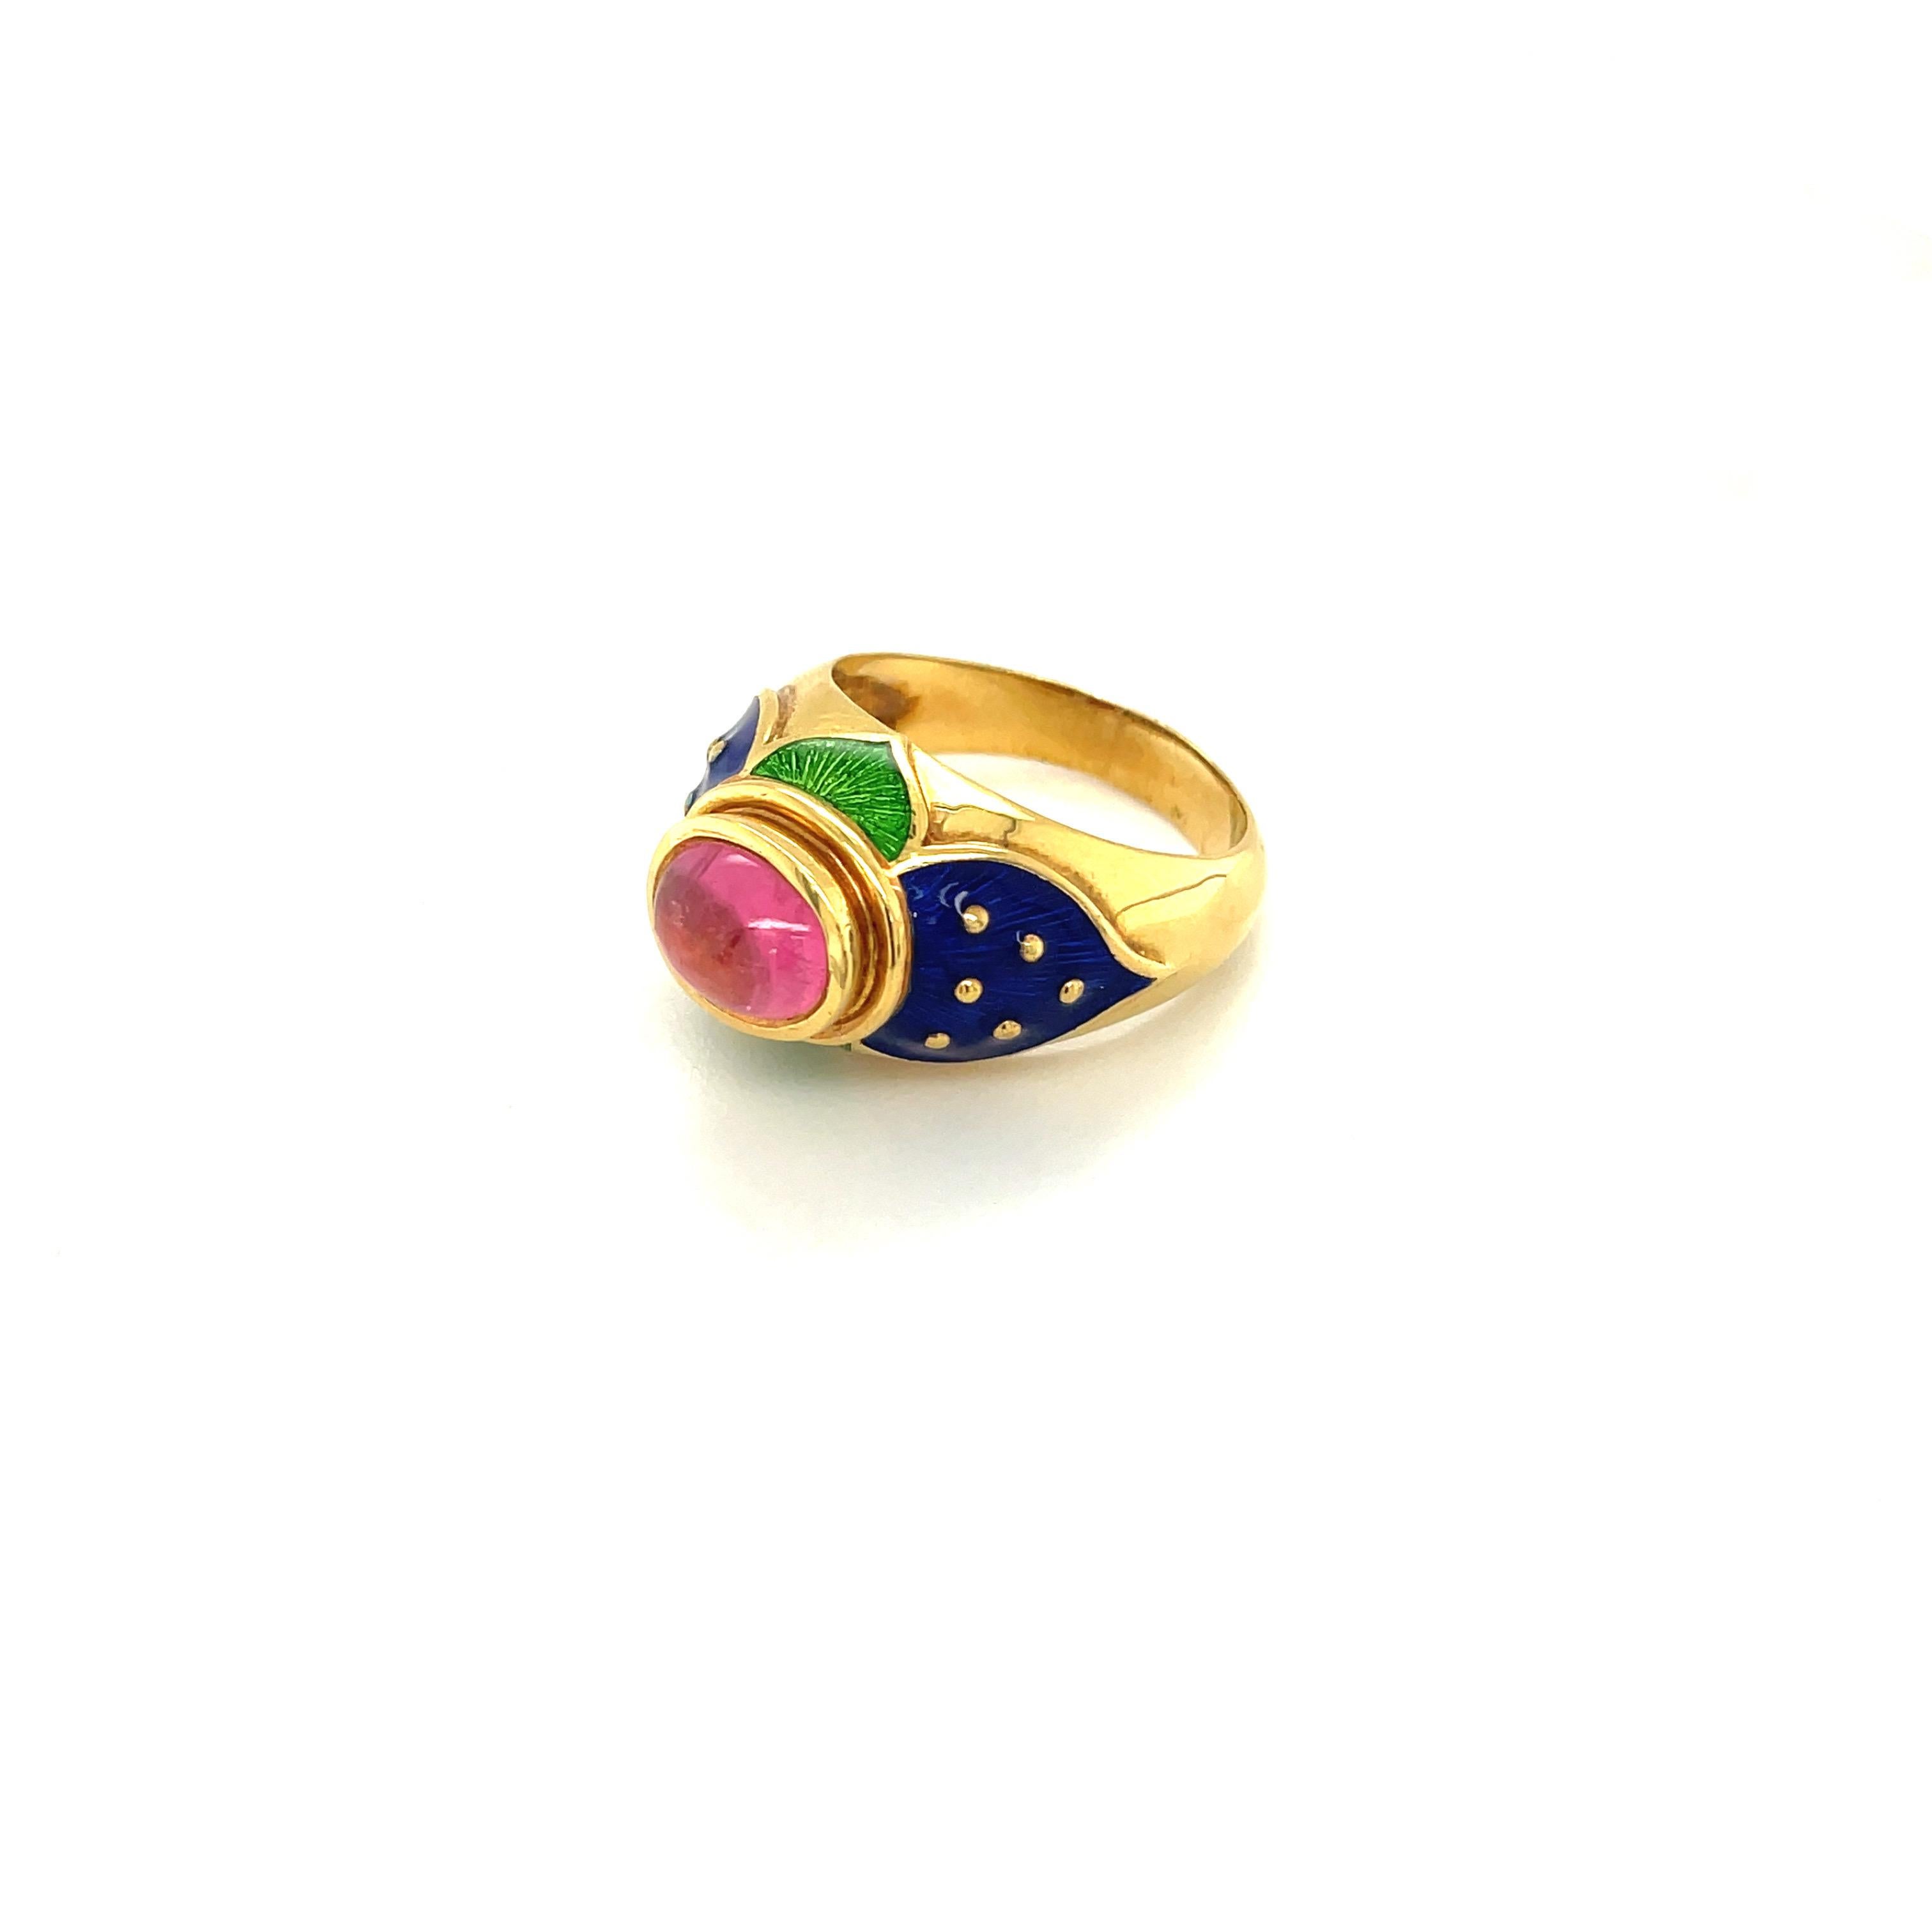 Contemporary Cellini 18KT YG Ring with Cabochon Pink Tourmaline Center & Blue & Green Enamel For Sale